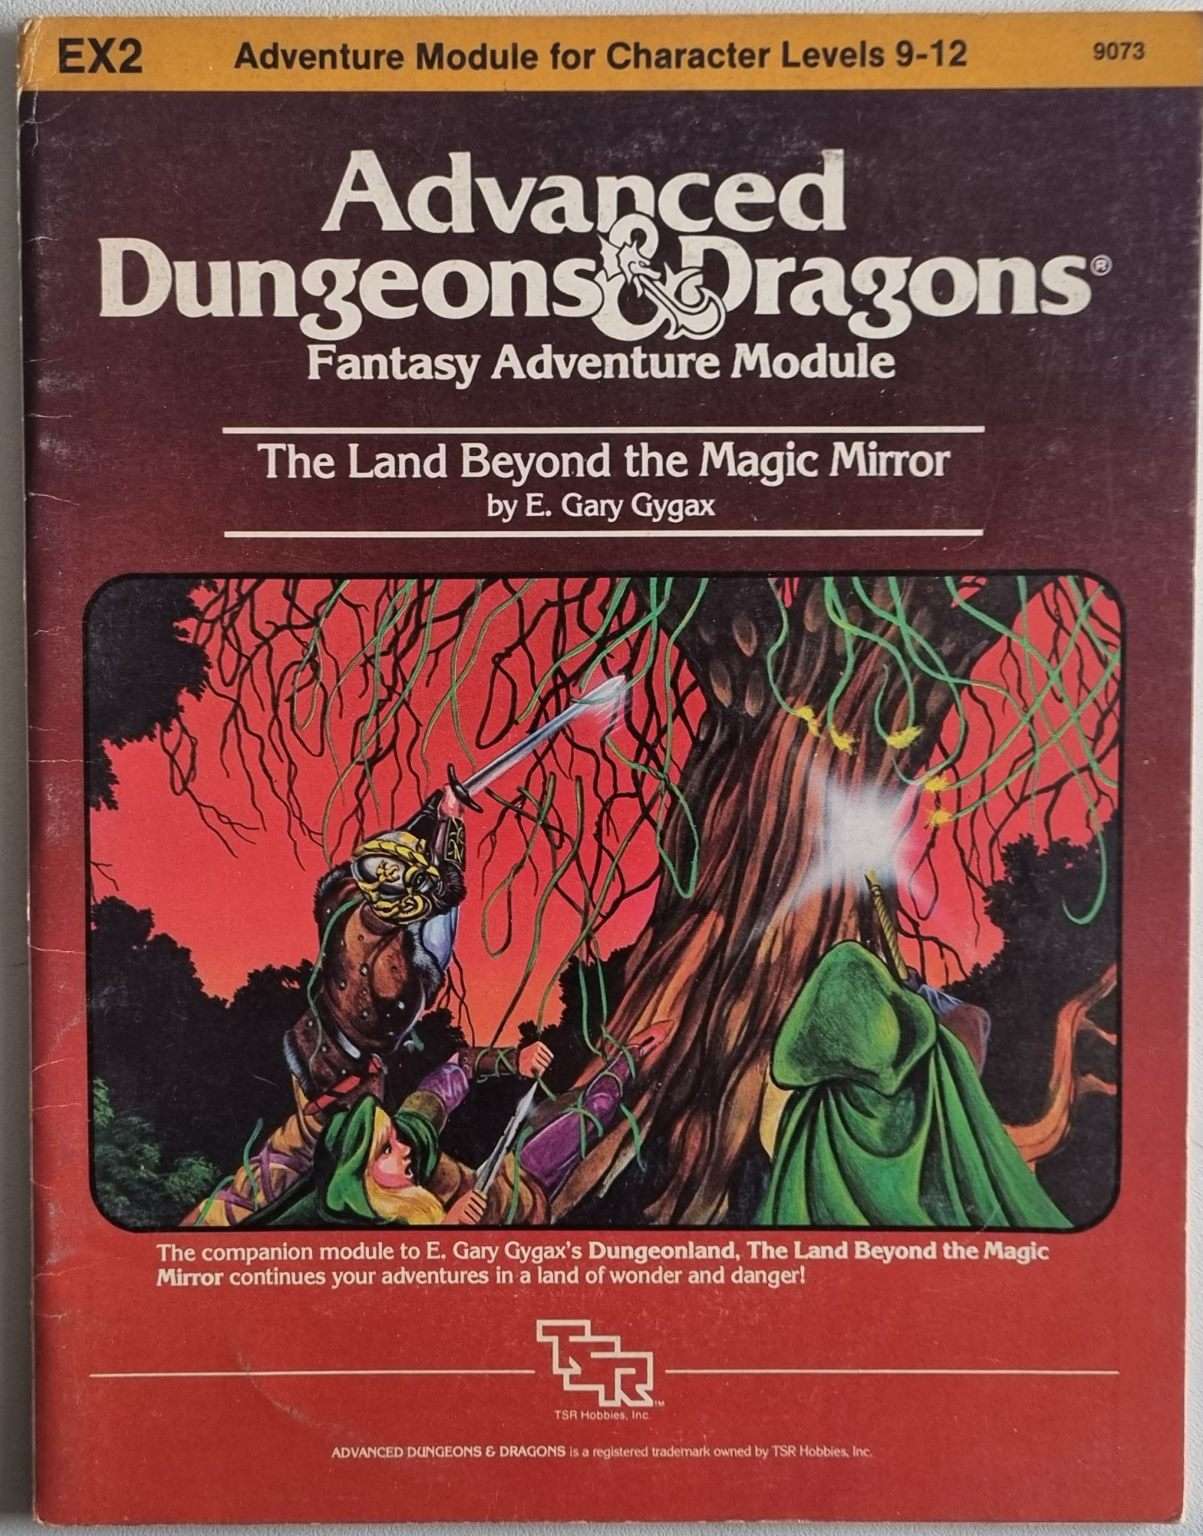 Advanced Dungeons and Dragons - The Land Beyond the Magic Mirror (EX2 9073) Default Title